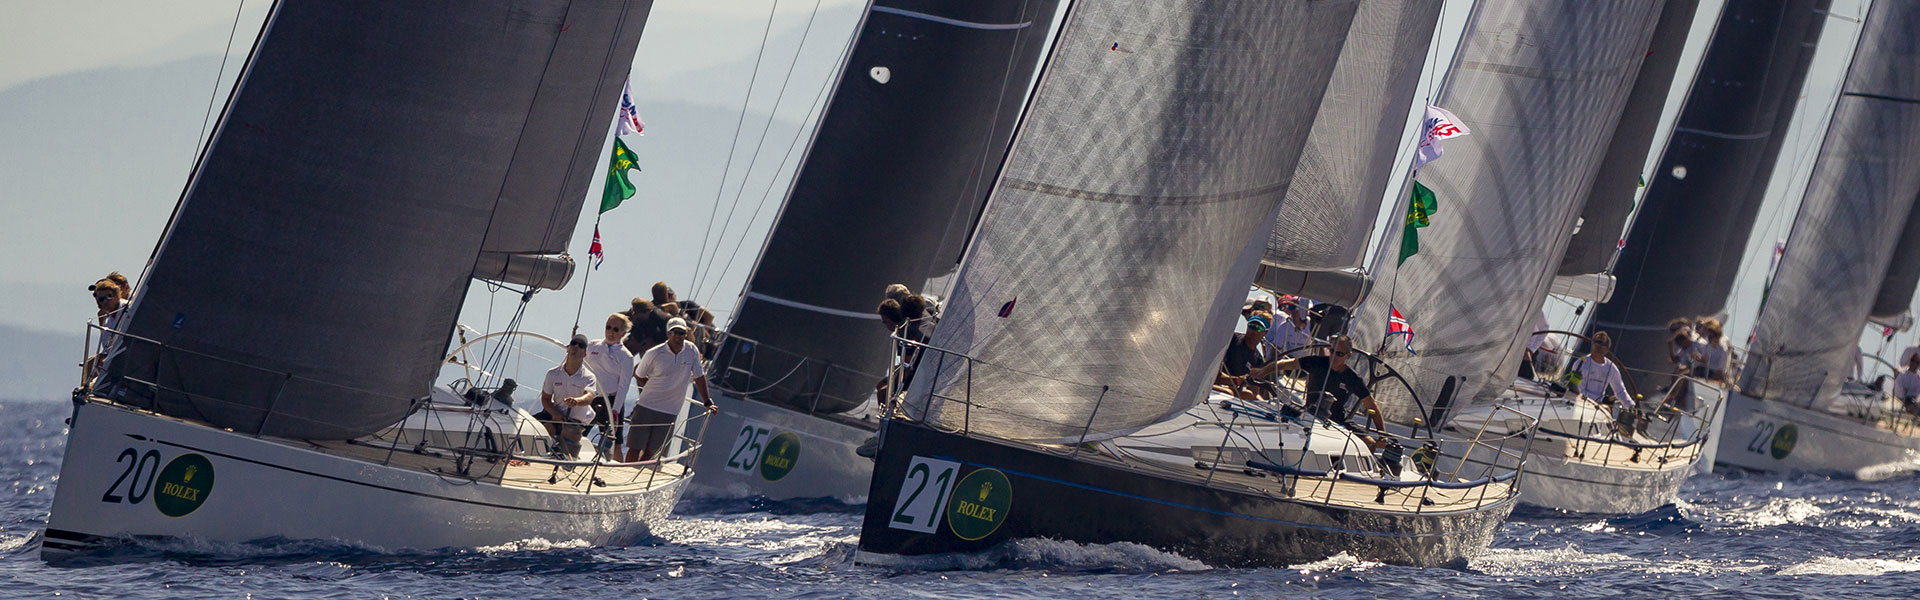 Rolex Swan Cup - Cancelled - Porto Cervo 2020